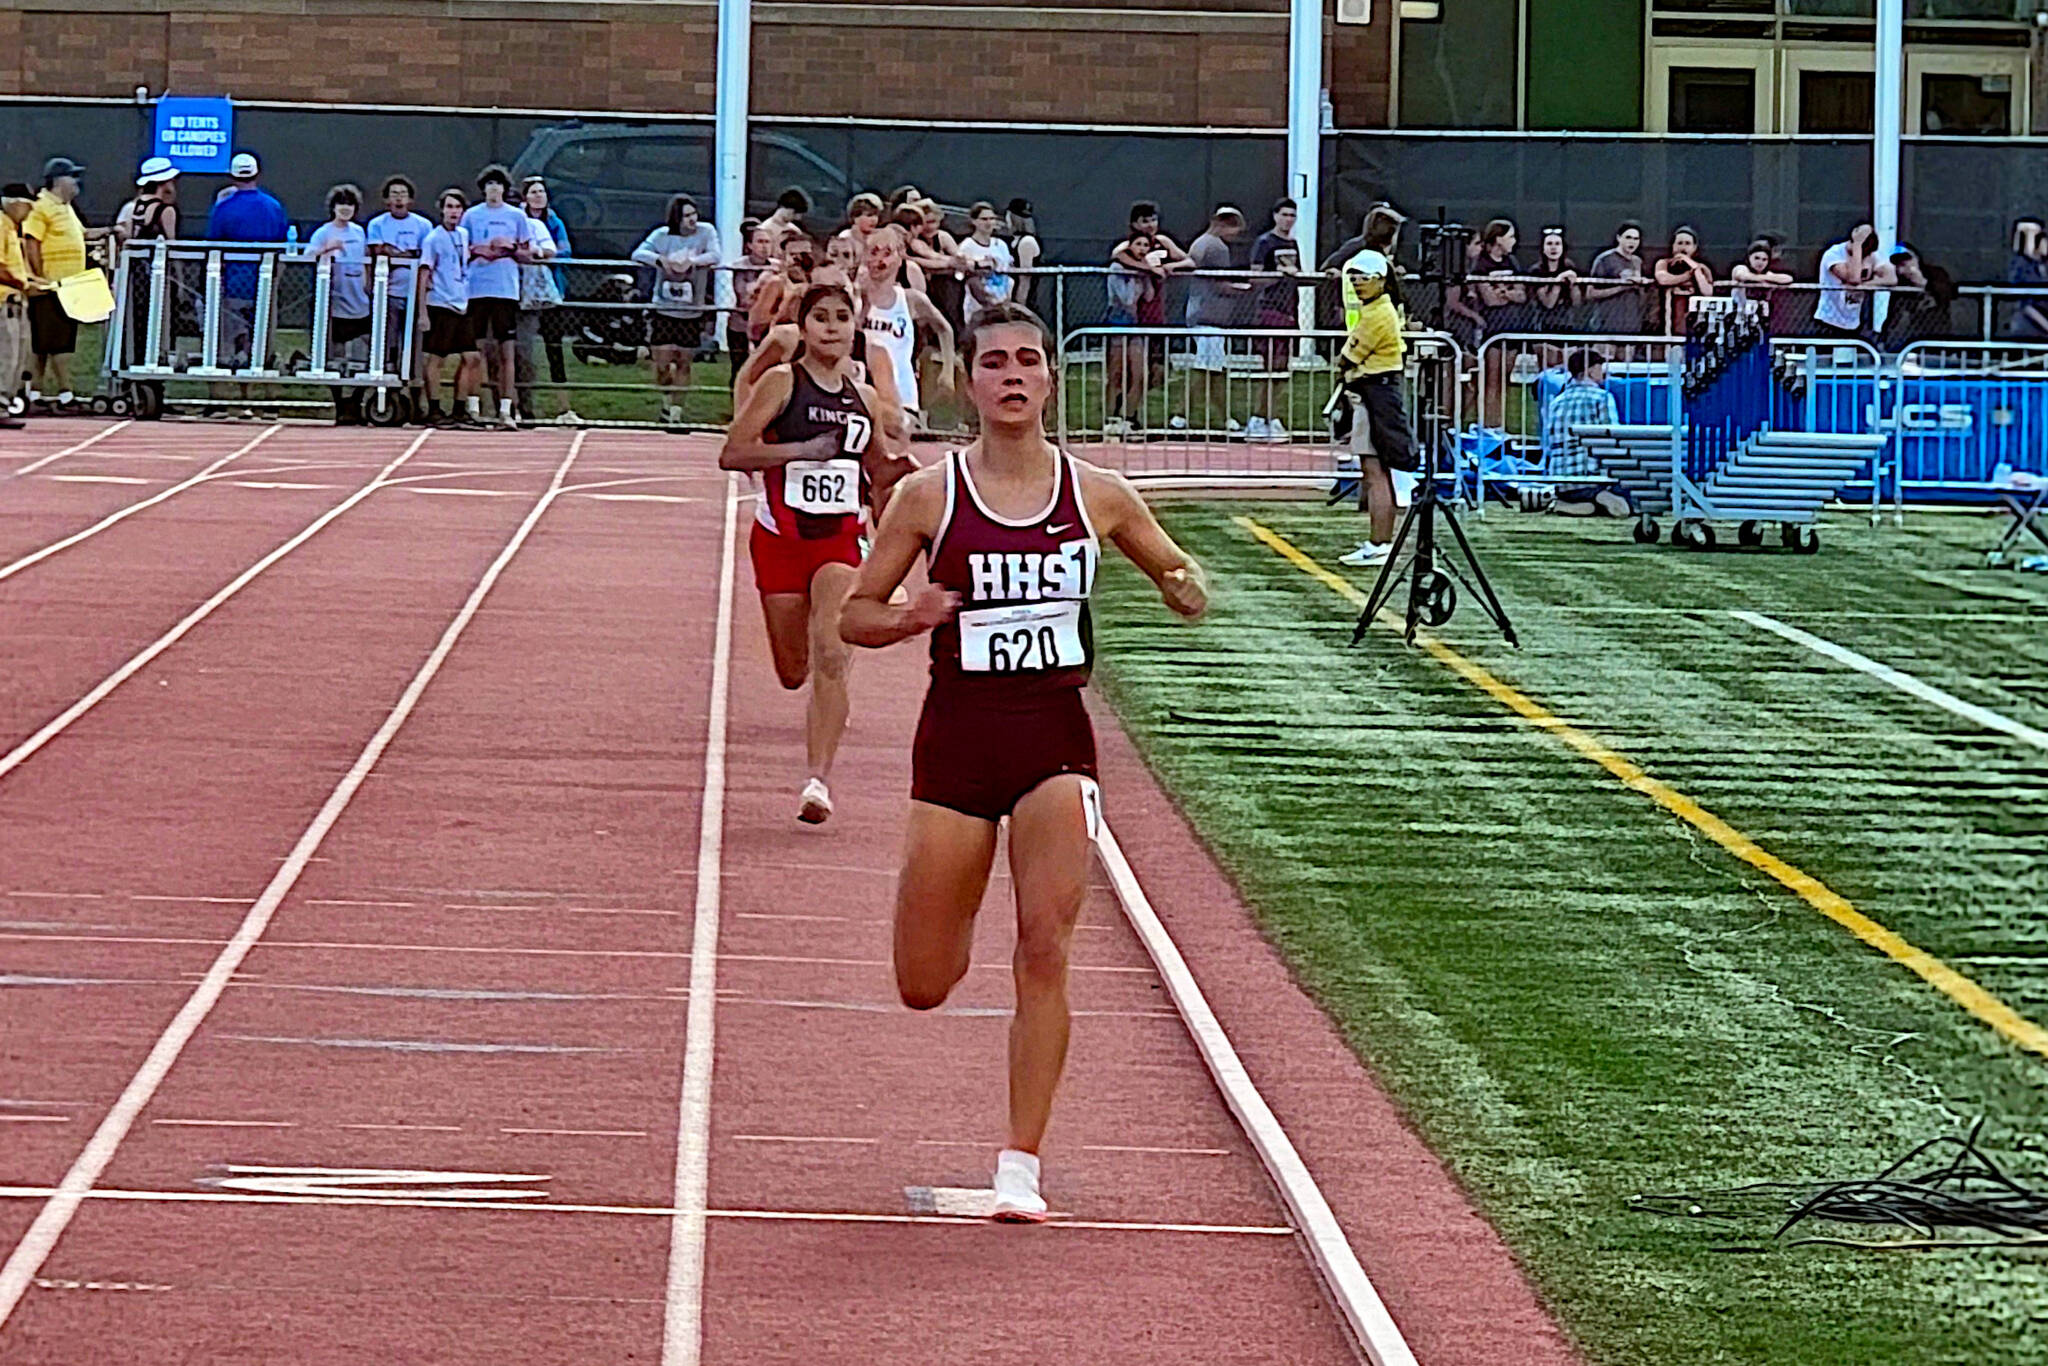 SUBMITTED PHOTO Hoquiam senior Jane Roloff leads the field during the girls 1600-meter race at the WIAA 1A State Championships on Thursday at Eisenhower High School in Yakima. Roloff would go on to win the state championship with a personal-best time of 4:58.86.